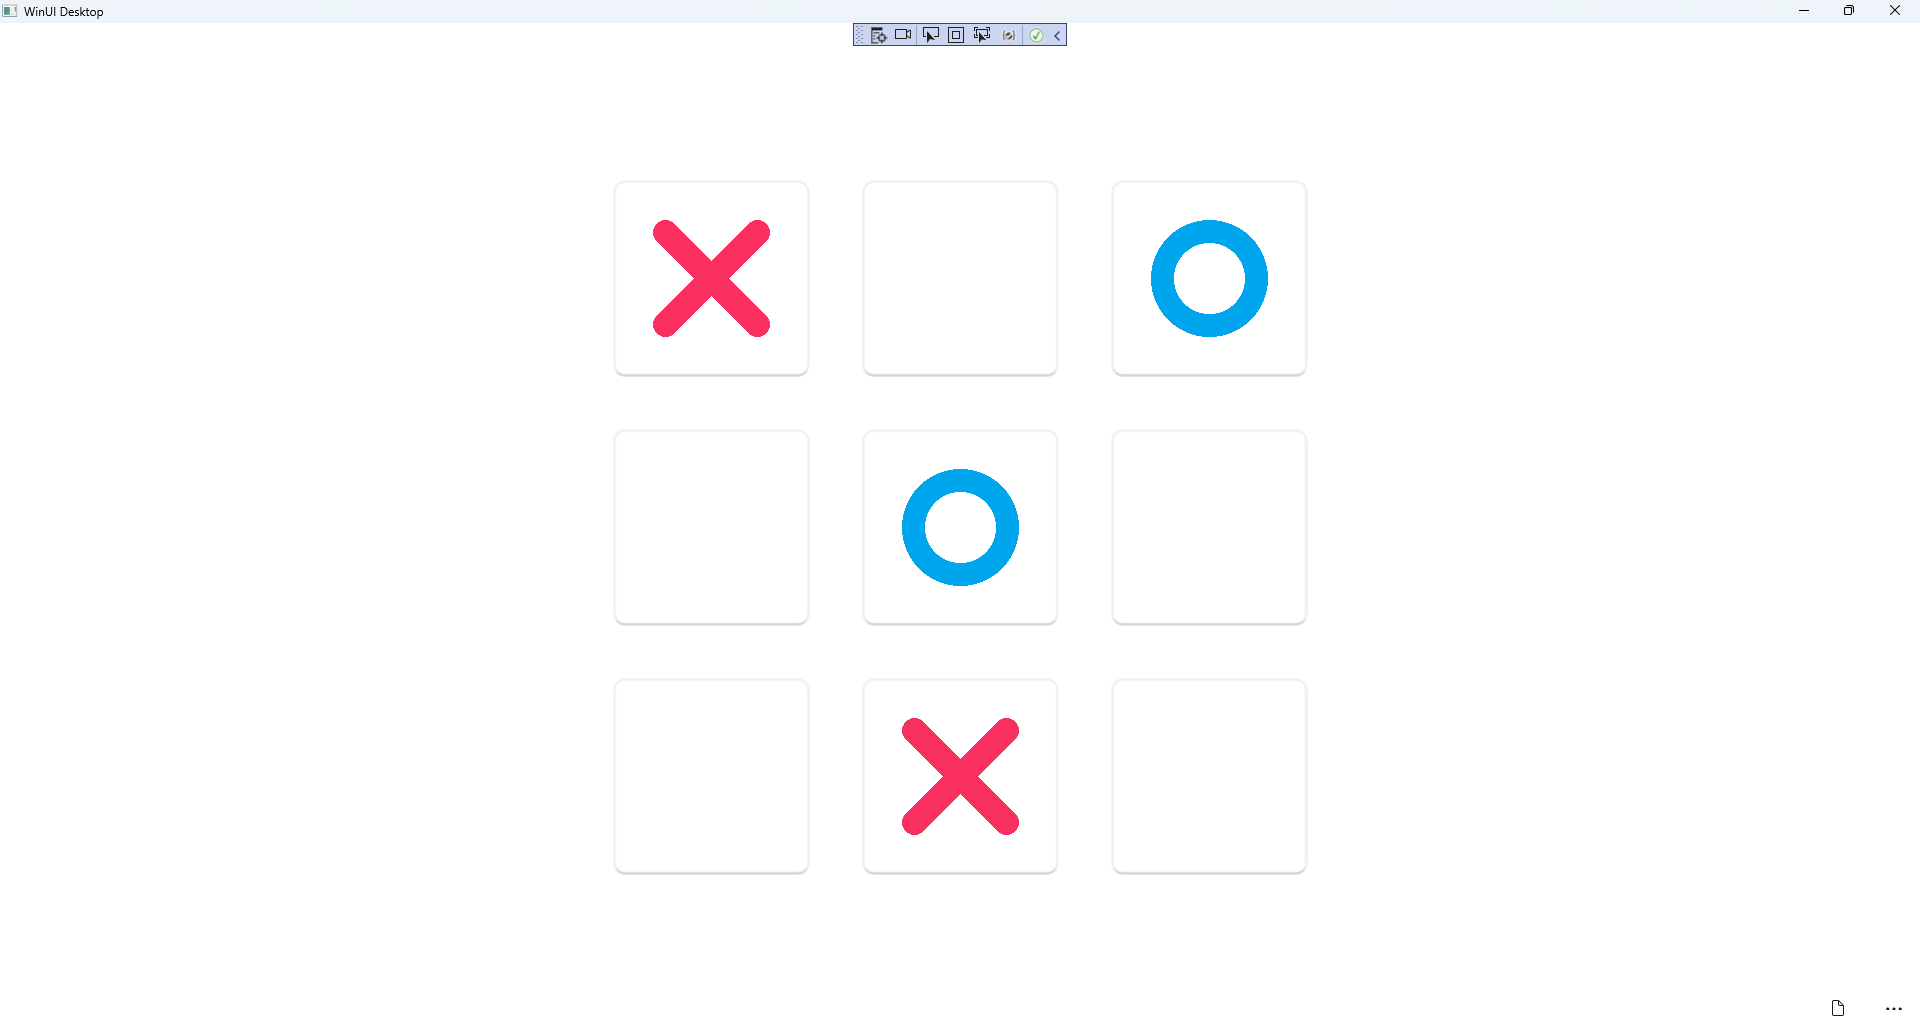 Tic Tac Toe Running and Output